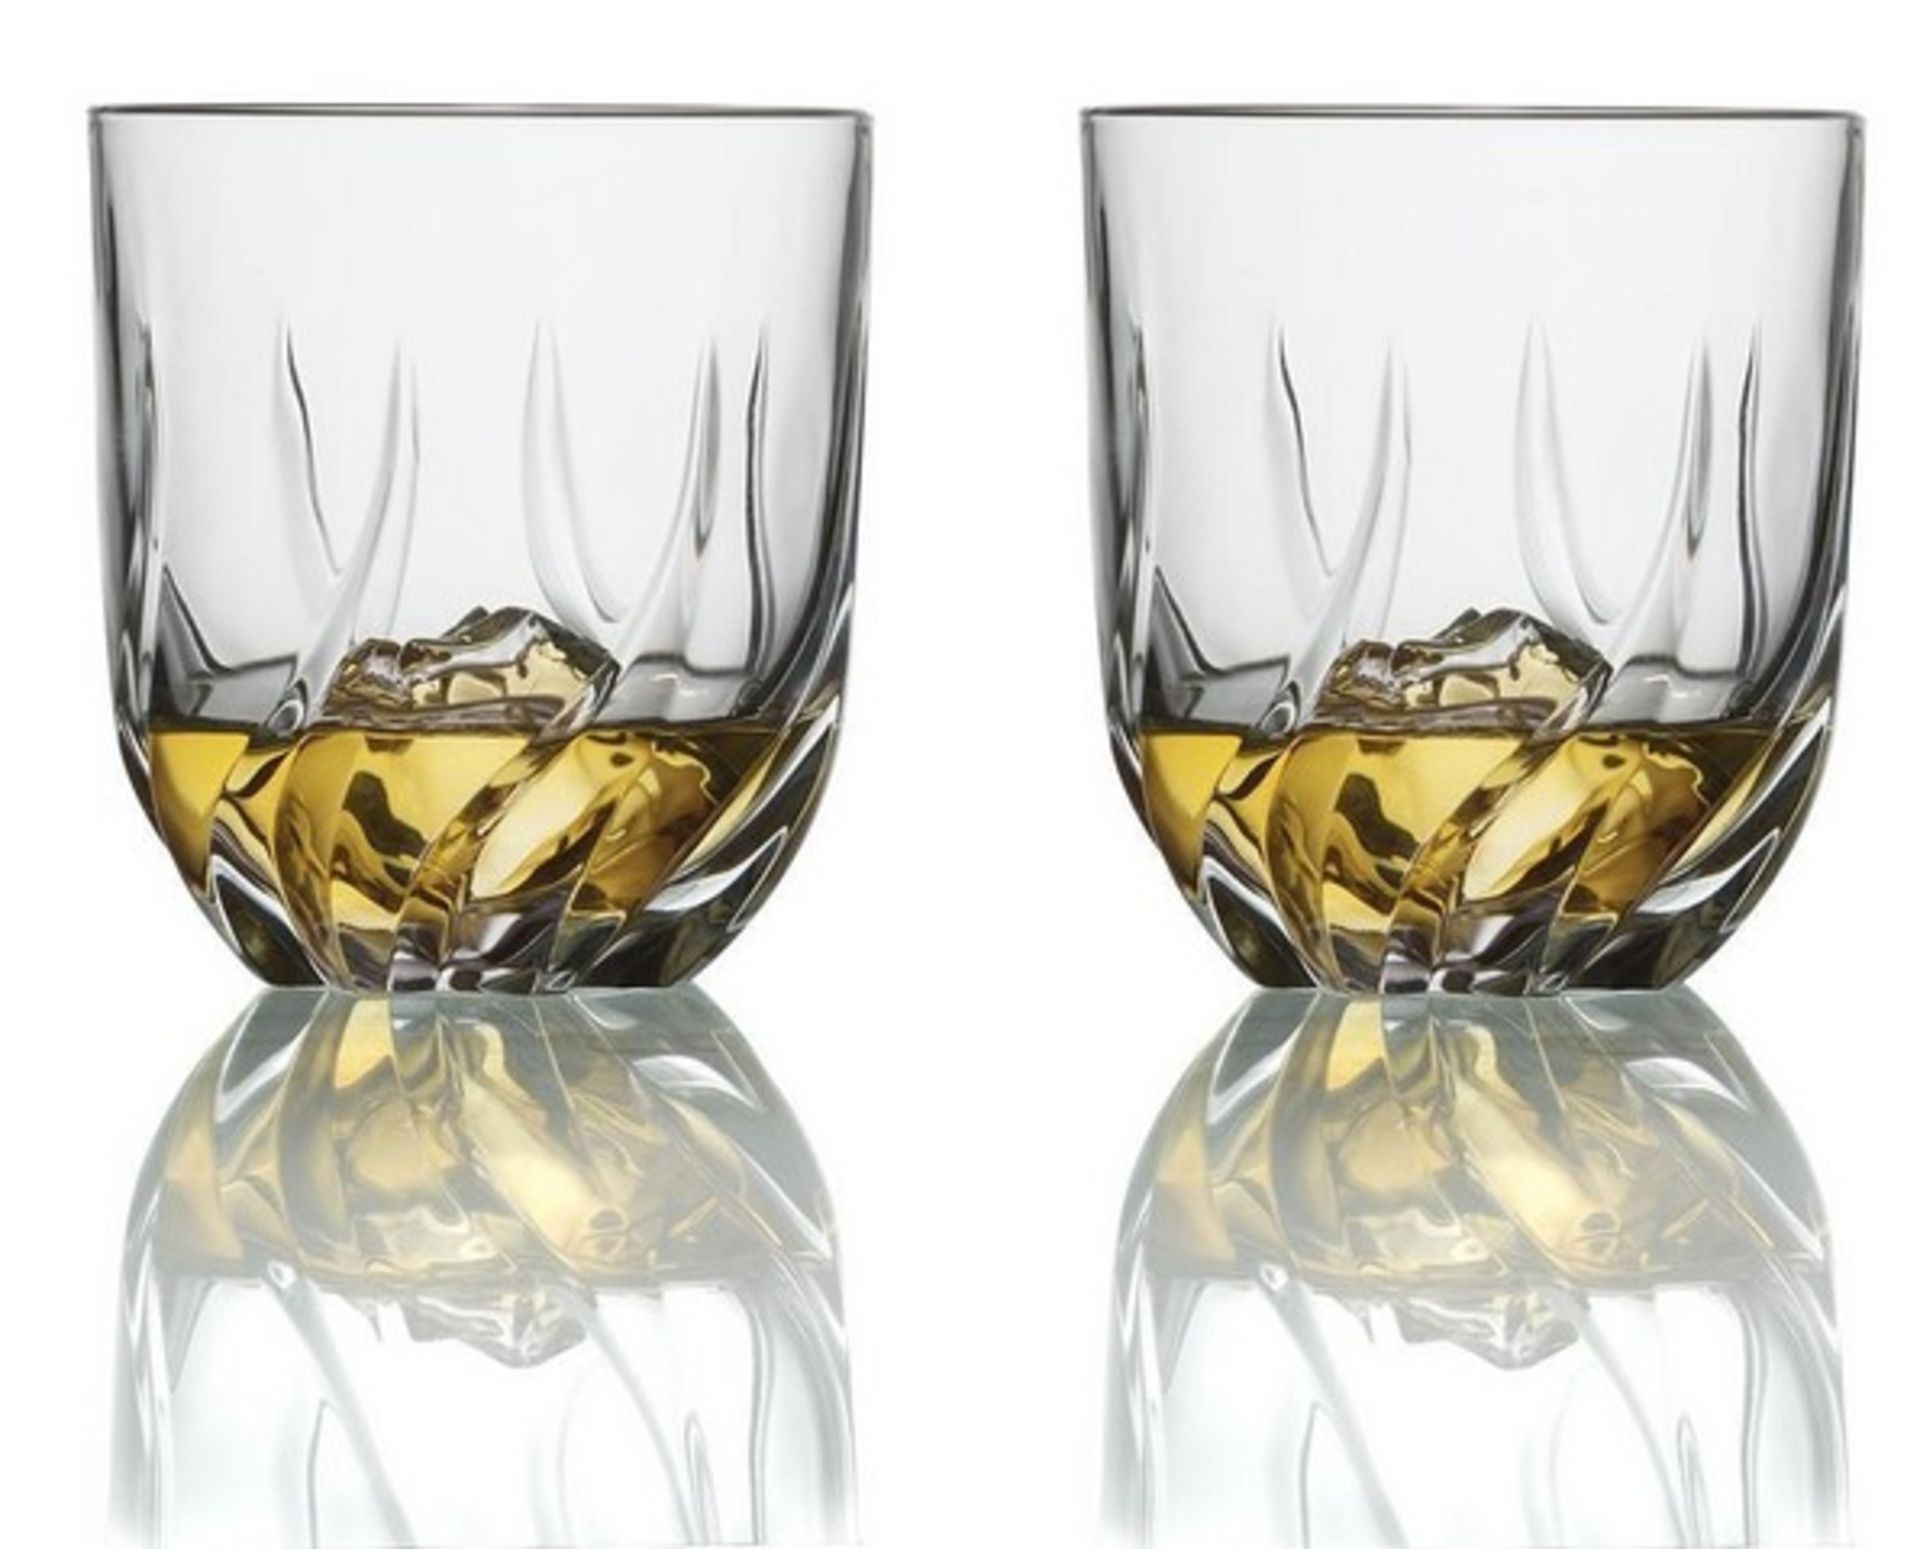 V Brand New Set of 2 RCR Twist Crystal Whiskey Glasses 33cl - Made In Italy